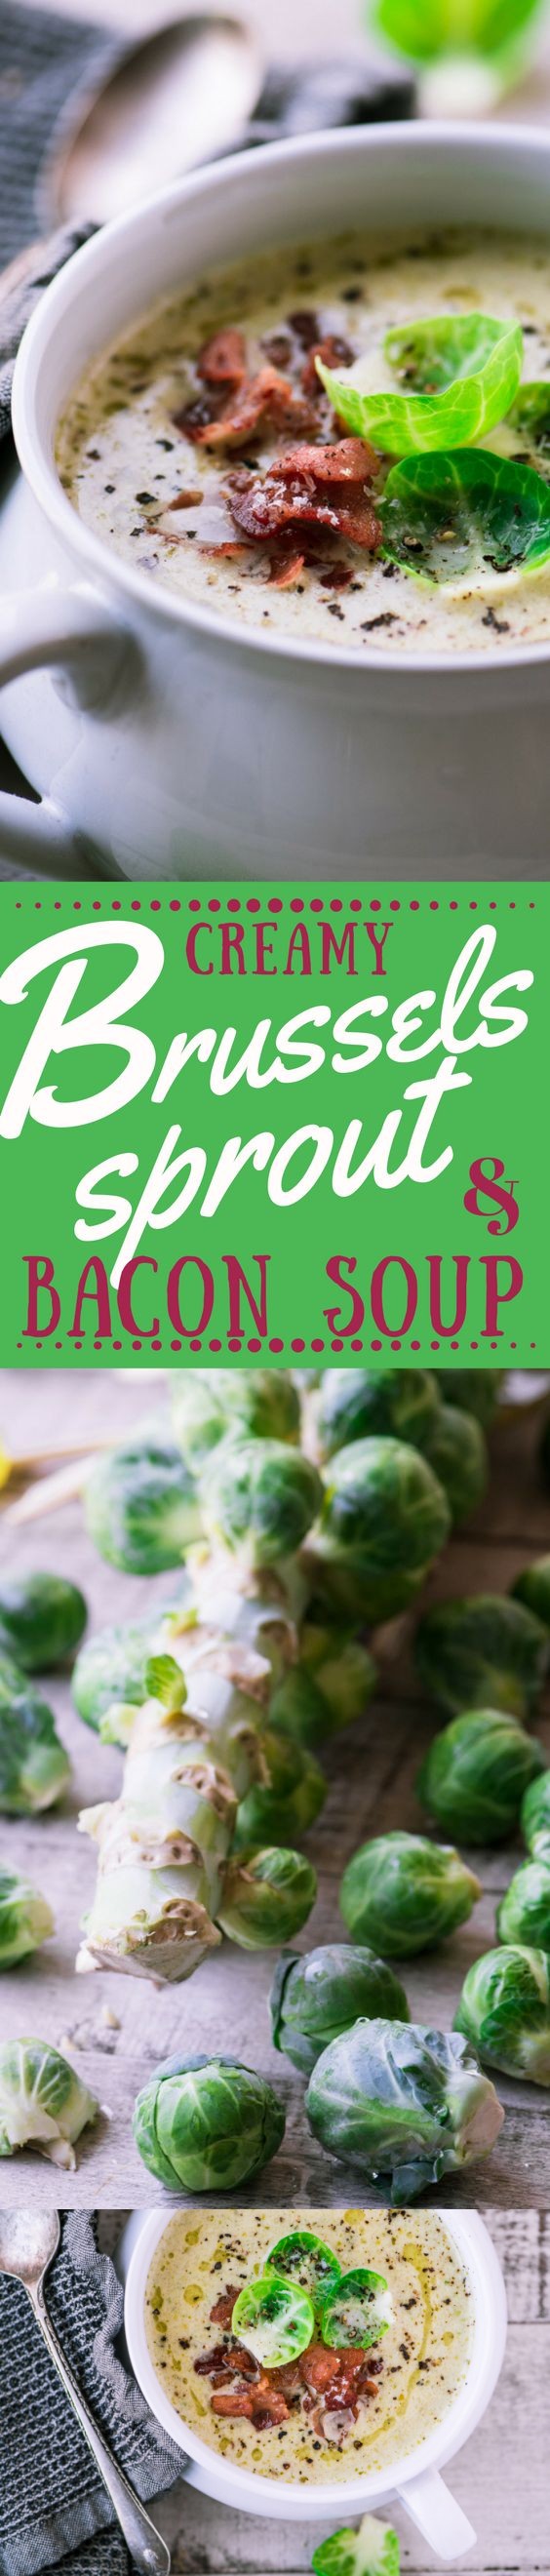 Creamy Brussels Sprout and Bacon Soup